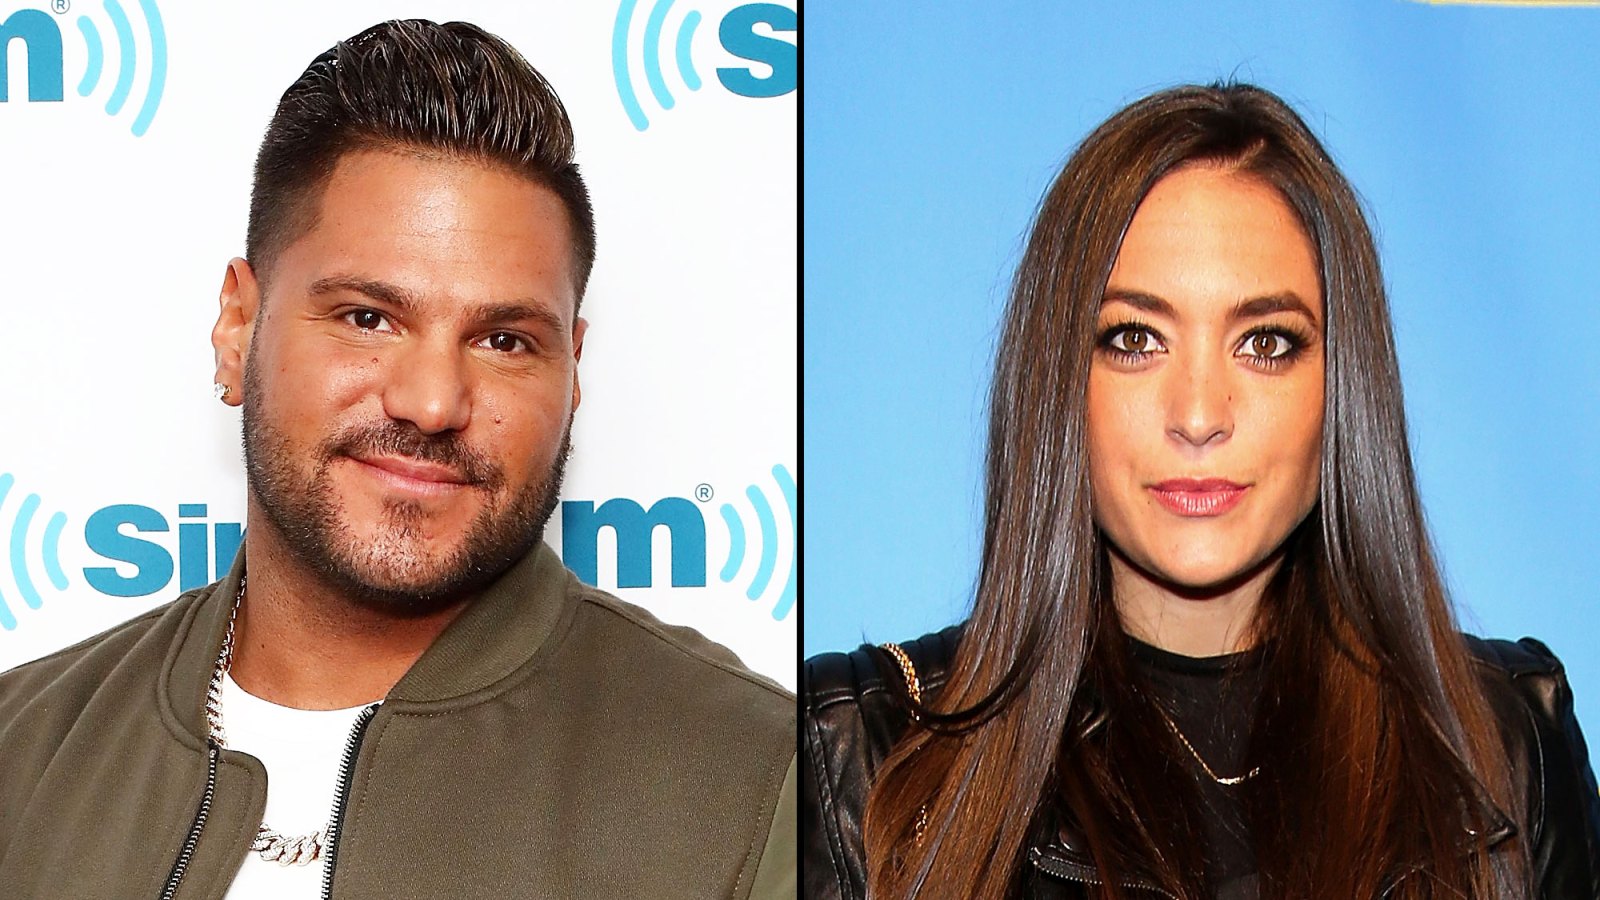 Have Jersey Shore’s Ronnie Ortiz-Magro and Sammi ‘Sweetheart’ Giancola Been in Contact Since Her Engagement?